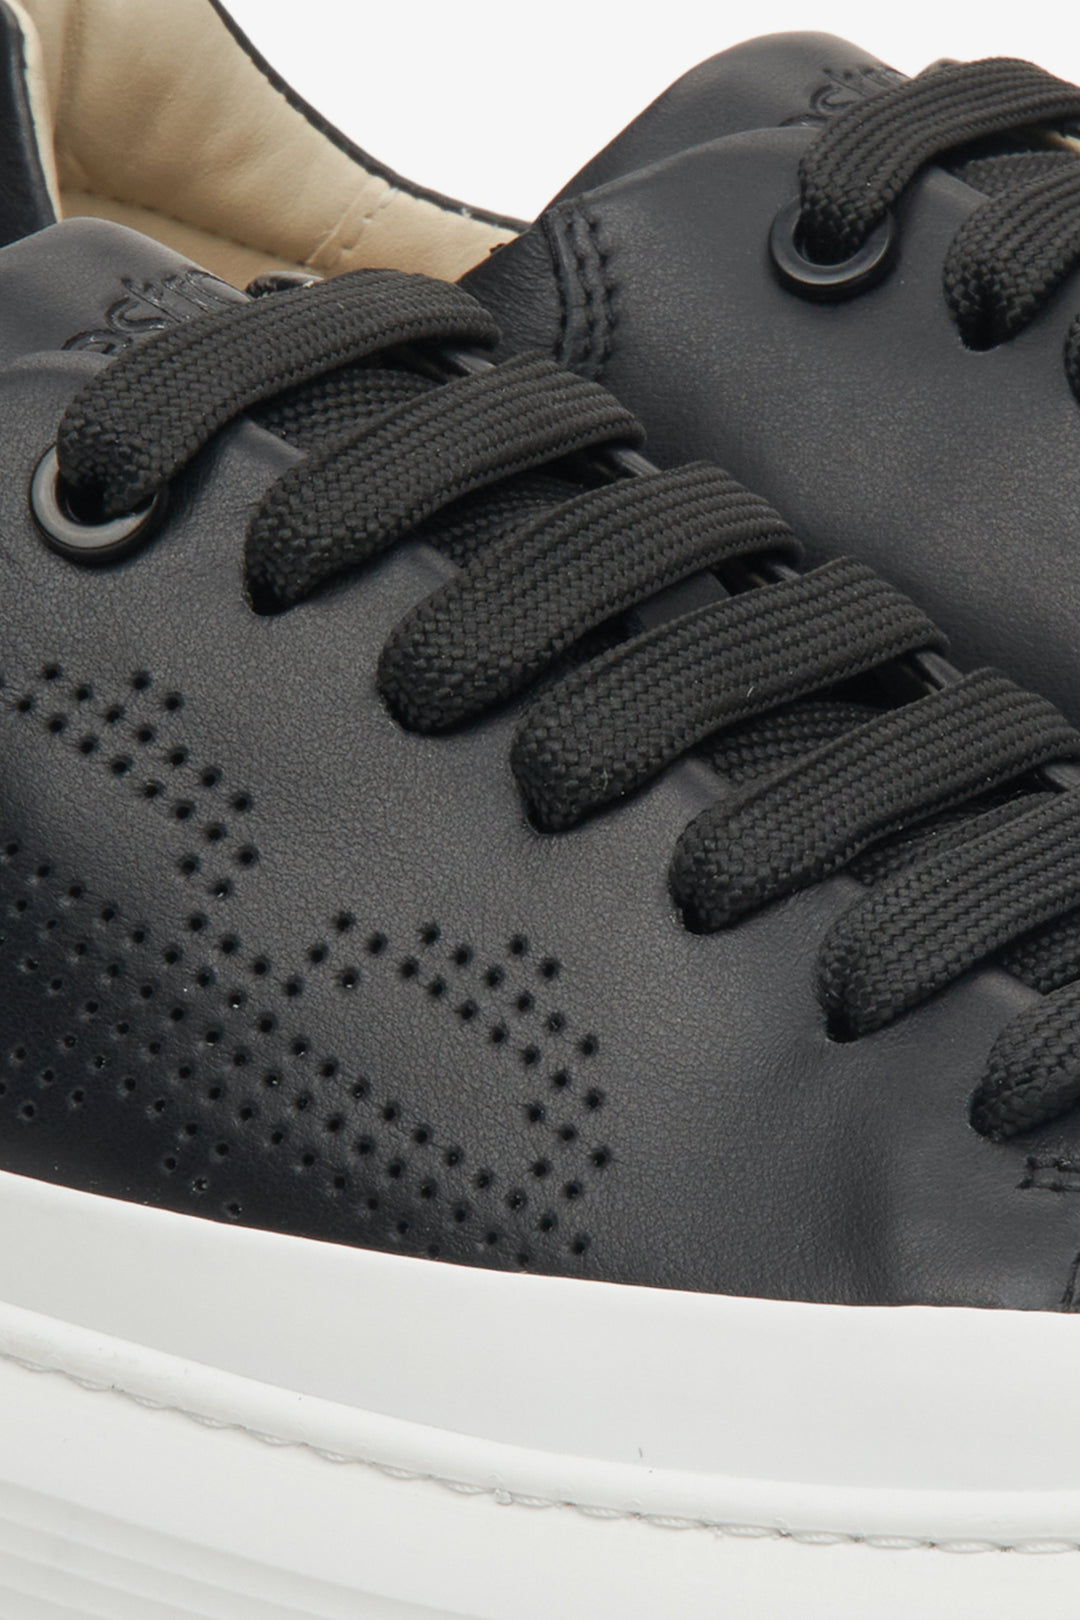 Women's black natural leather sneakers with Estro - close-up on the details.